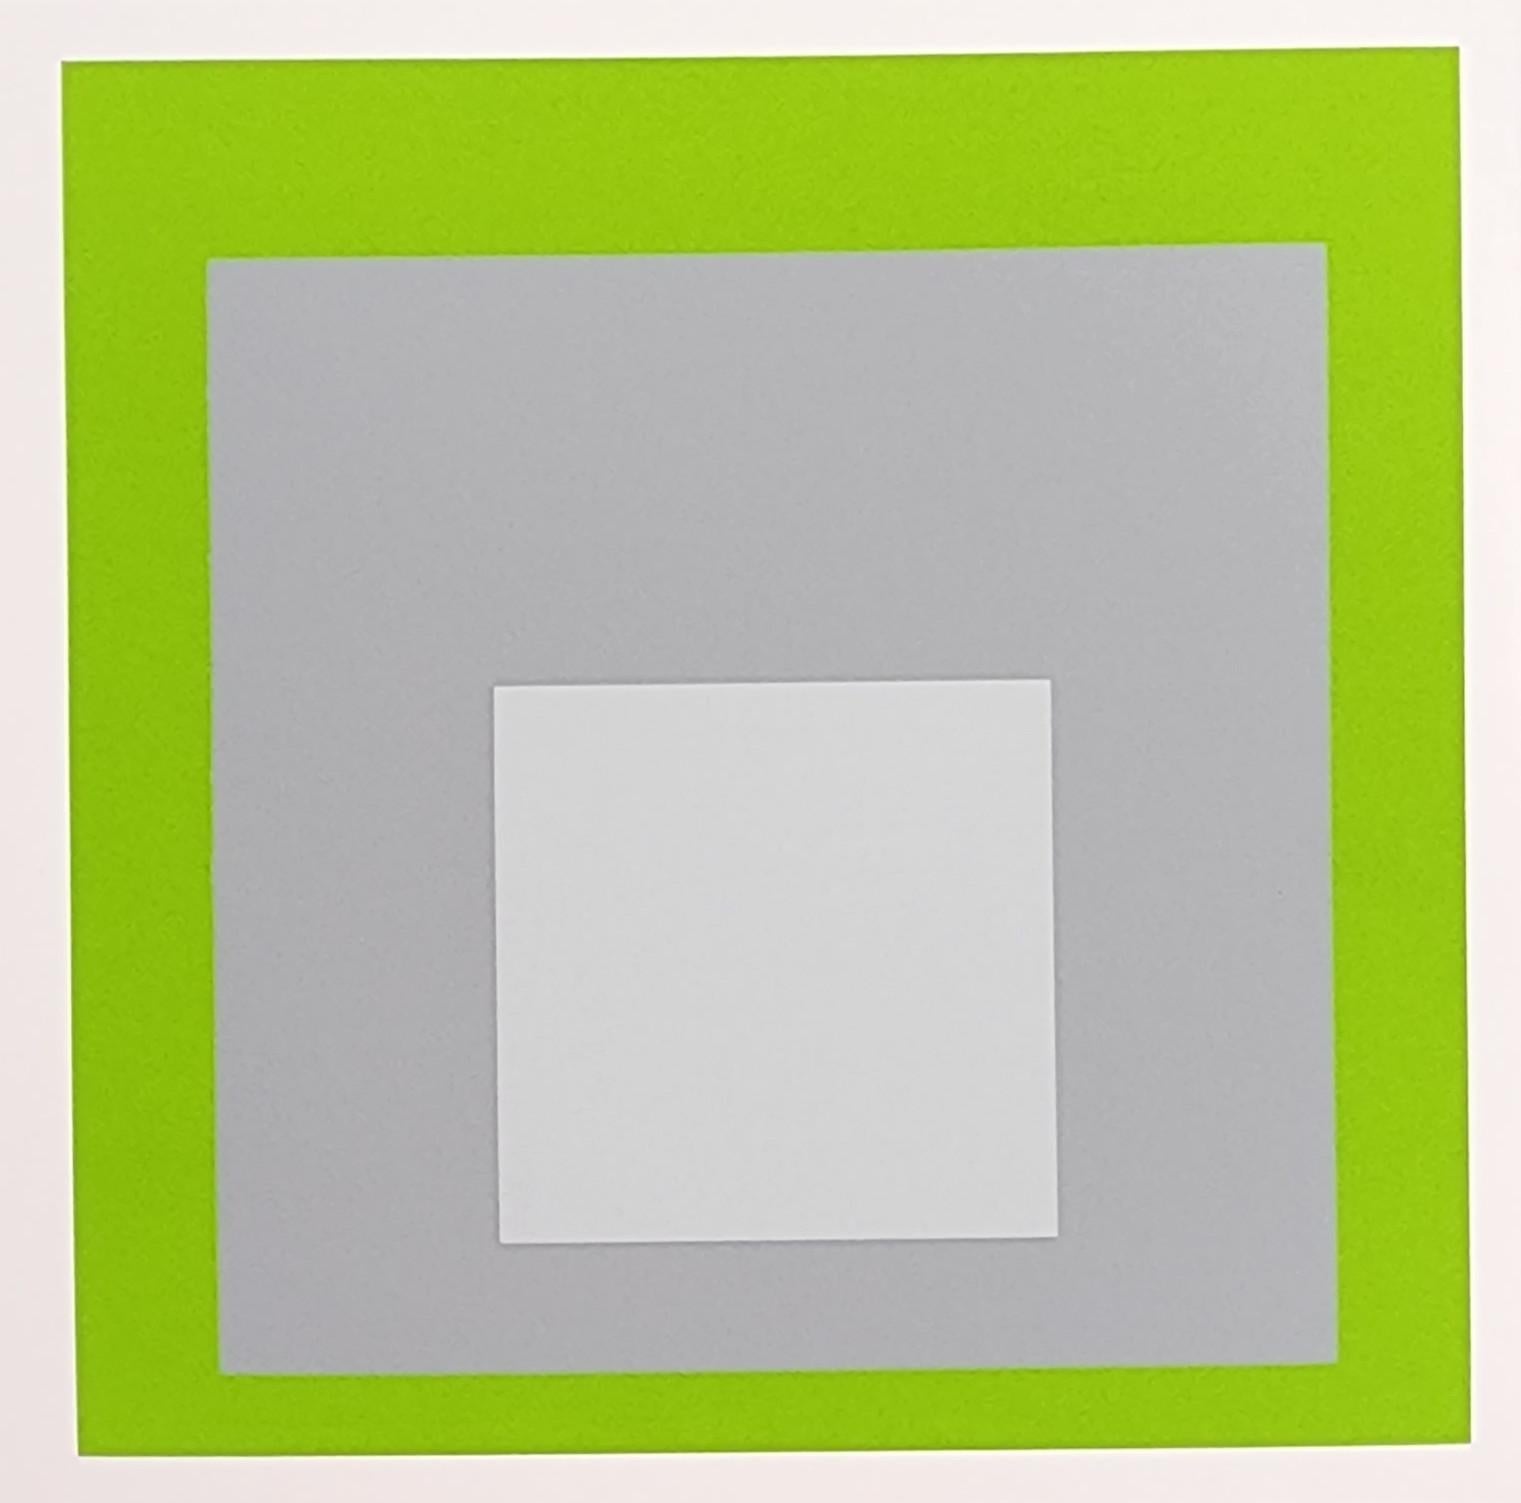 Homage to the Square: Six Silkscreen Prints (~56% OFF LIST PRICE - LIMITED TIME) 5